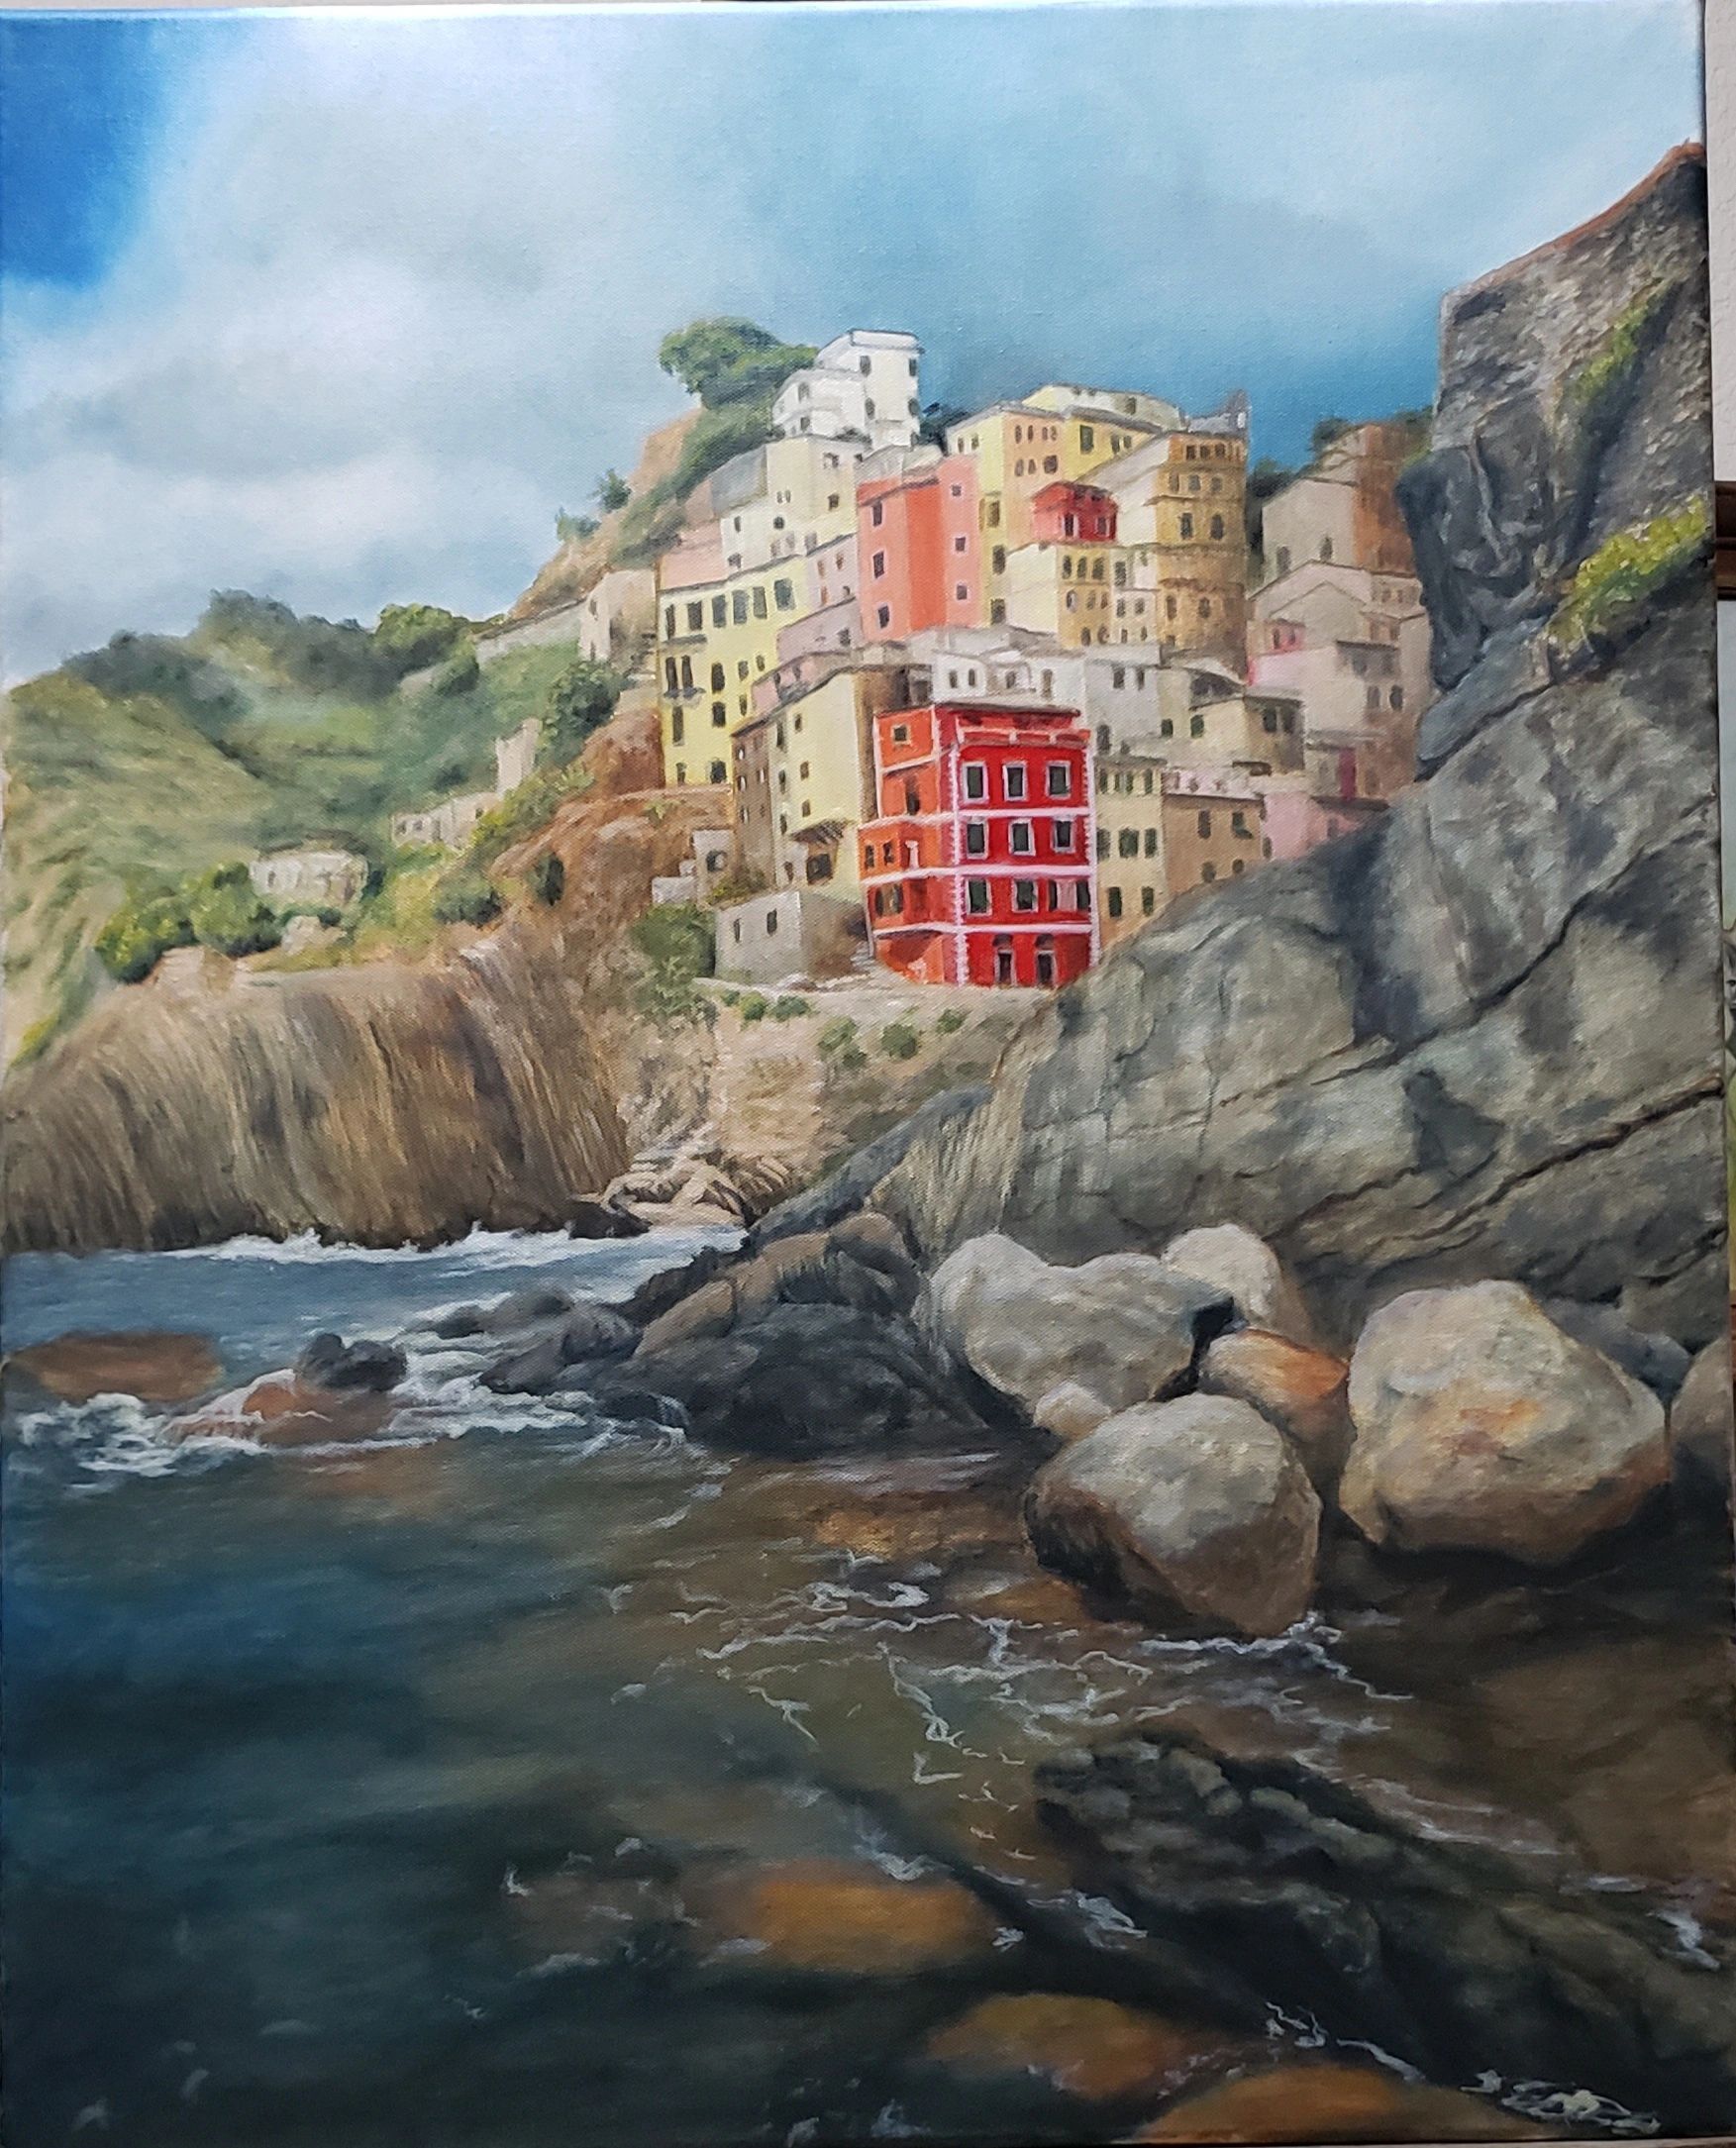 Third in my Italy series. 24"x 30".